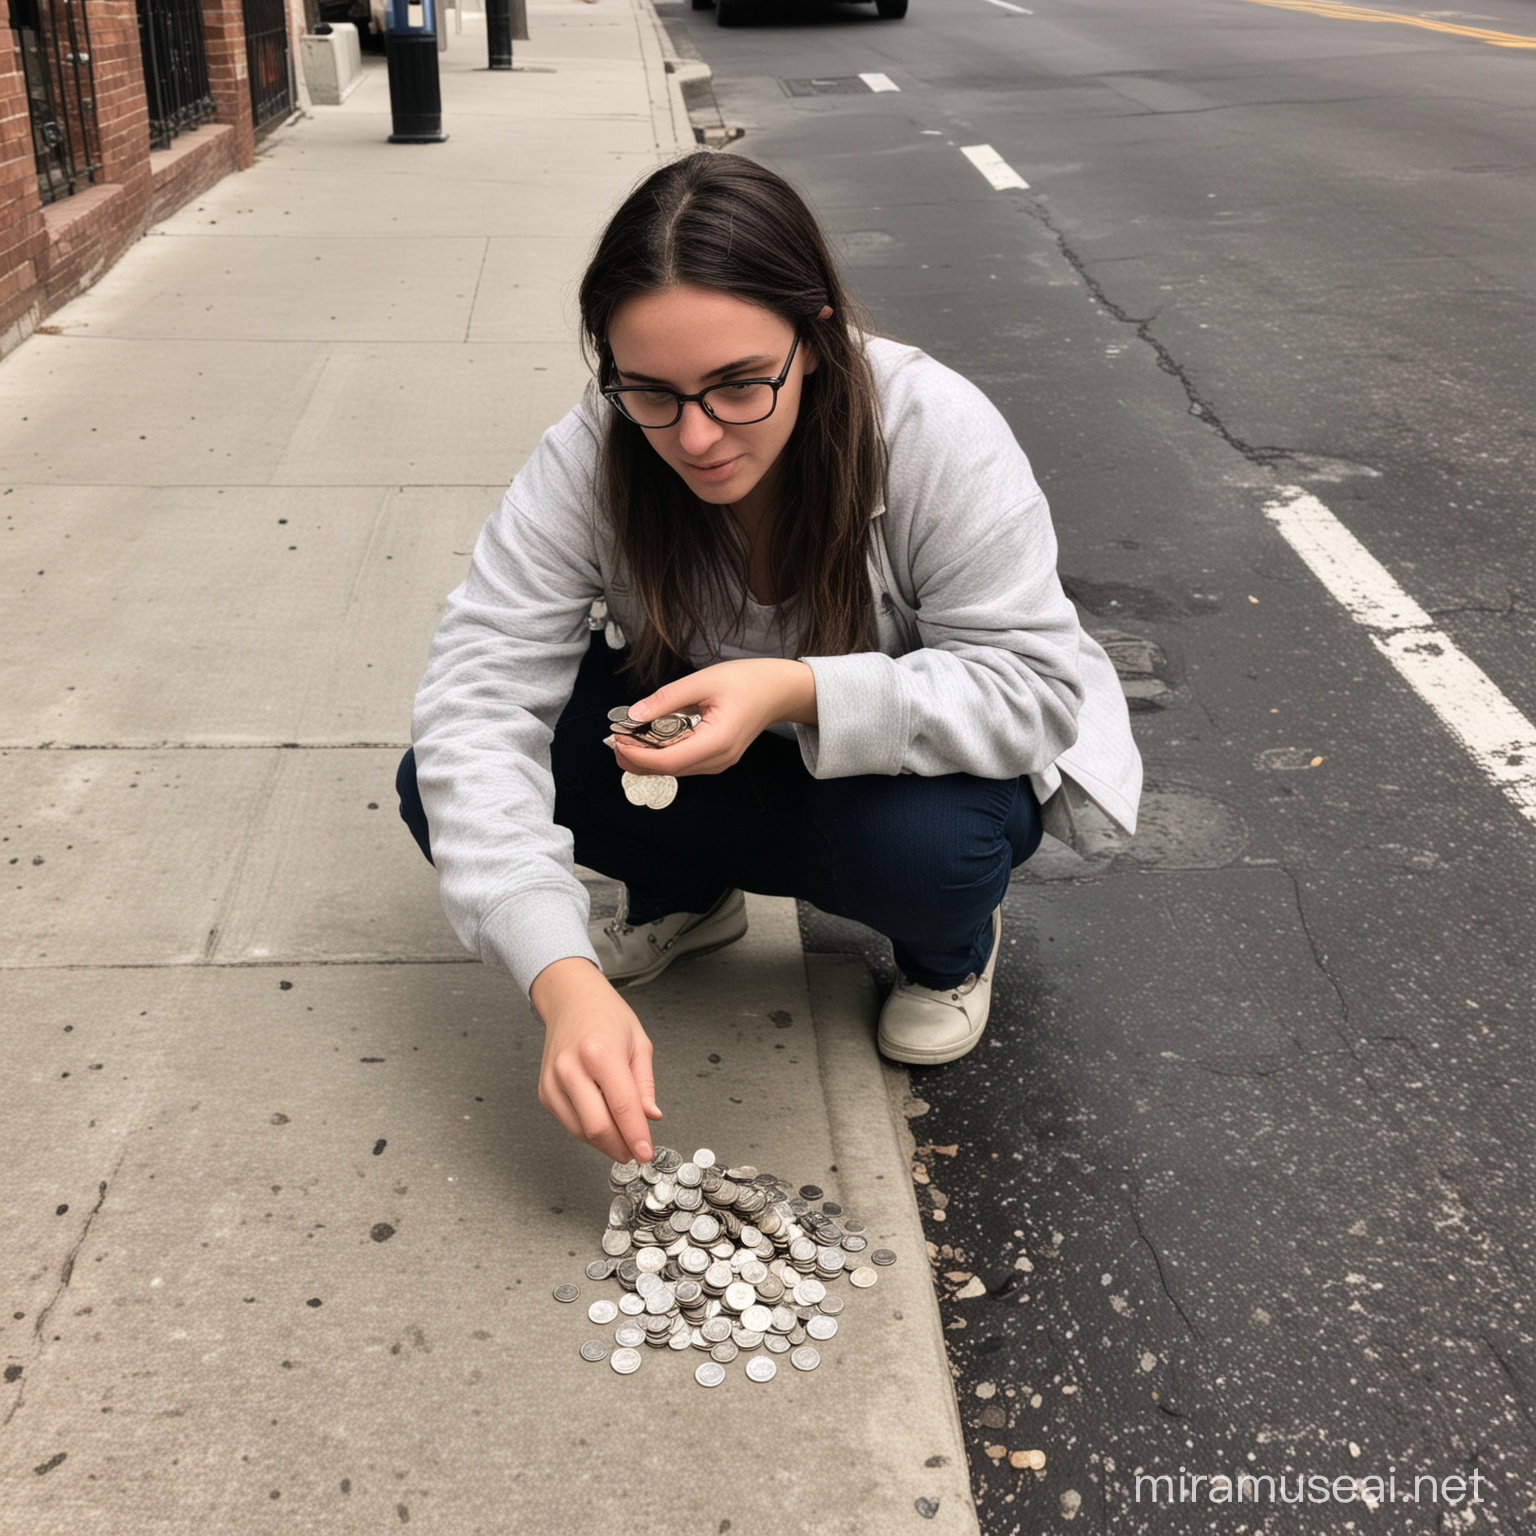 Dork picking up dimes in the street